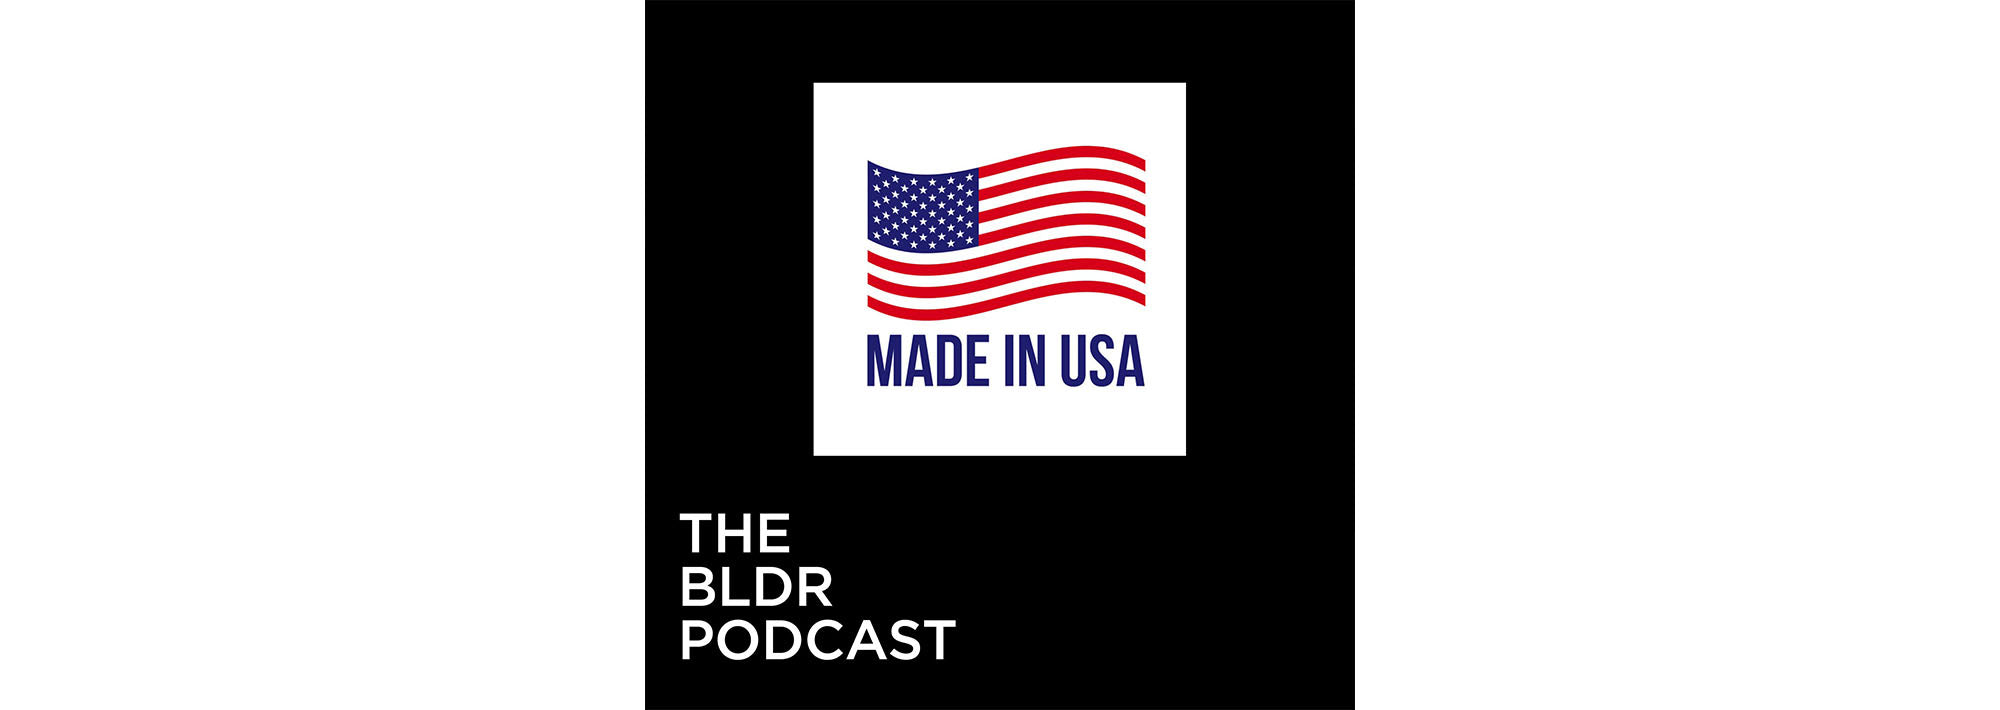 BLDR Podcast - What "USA Made" Means to Us